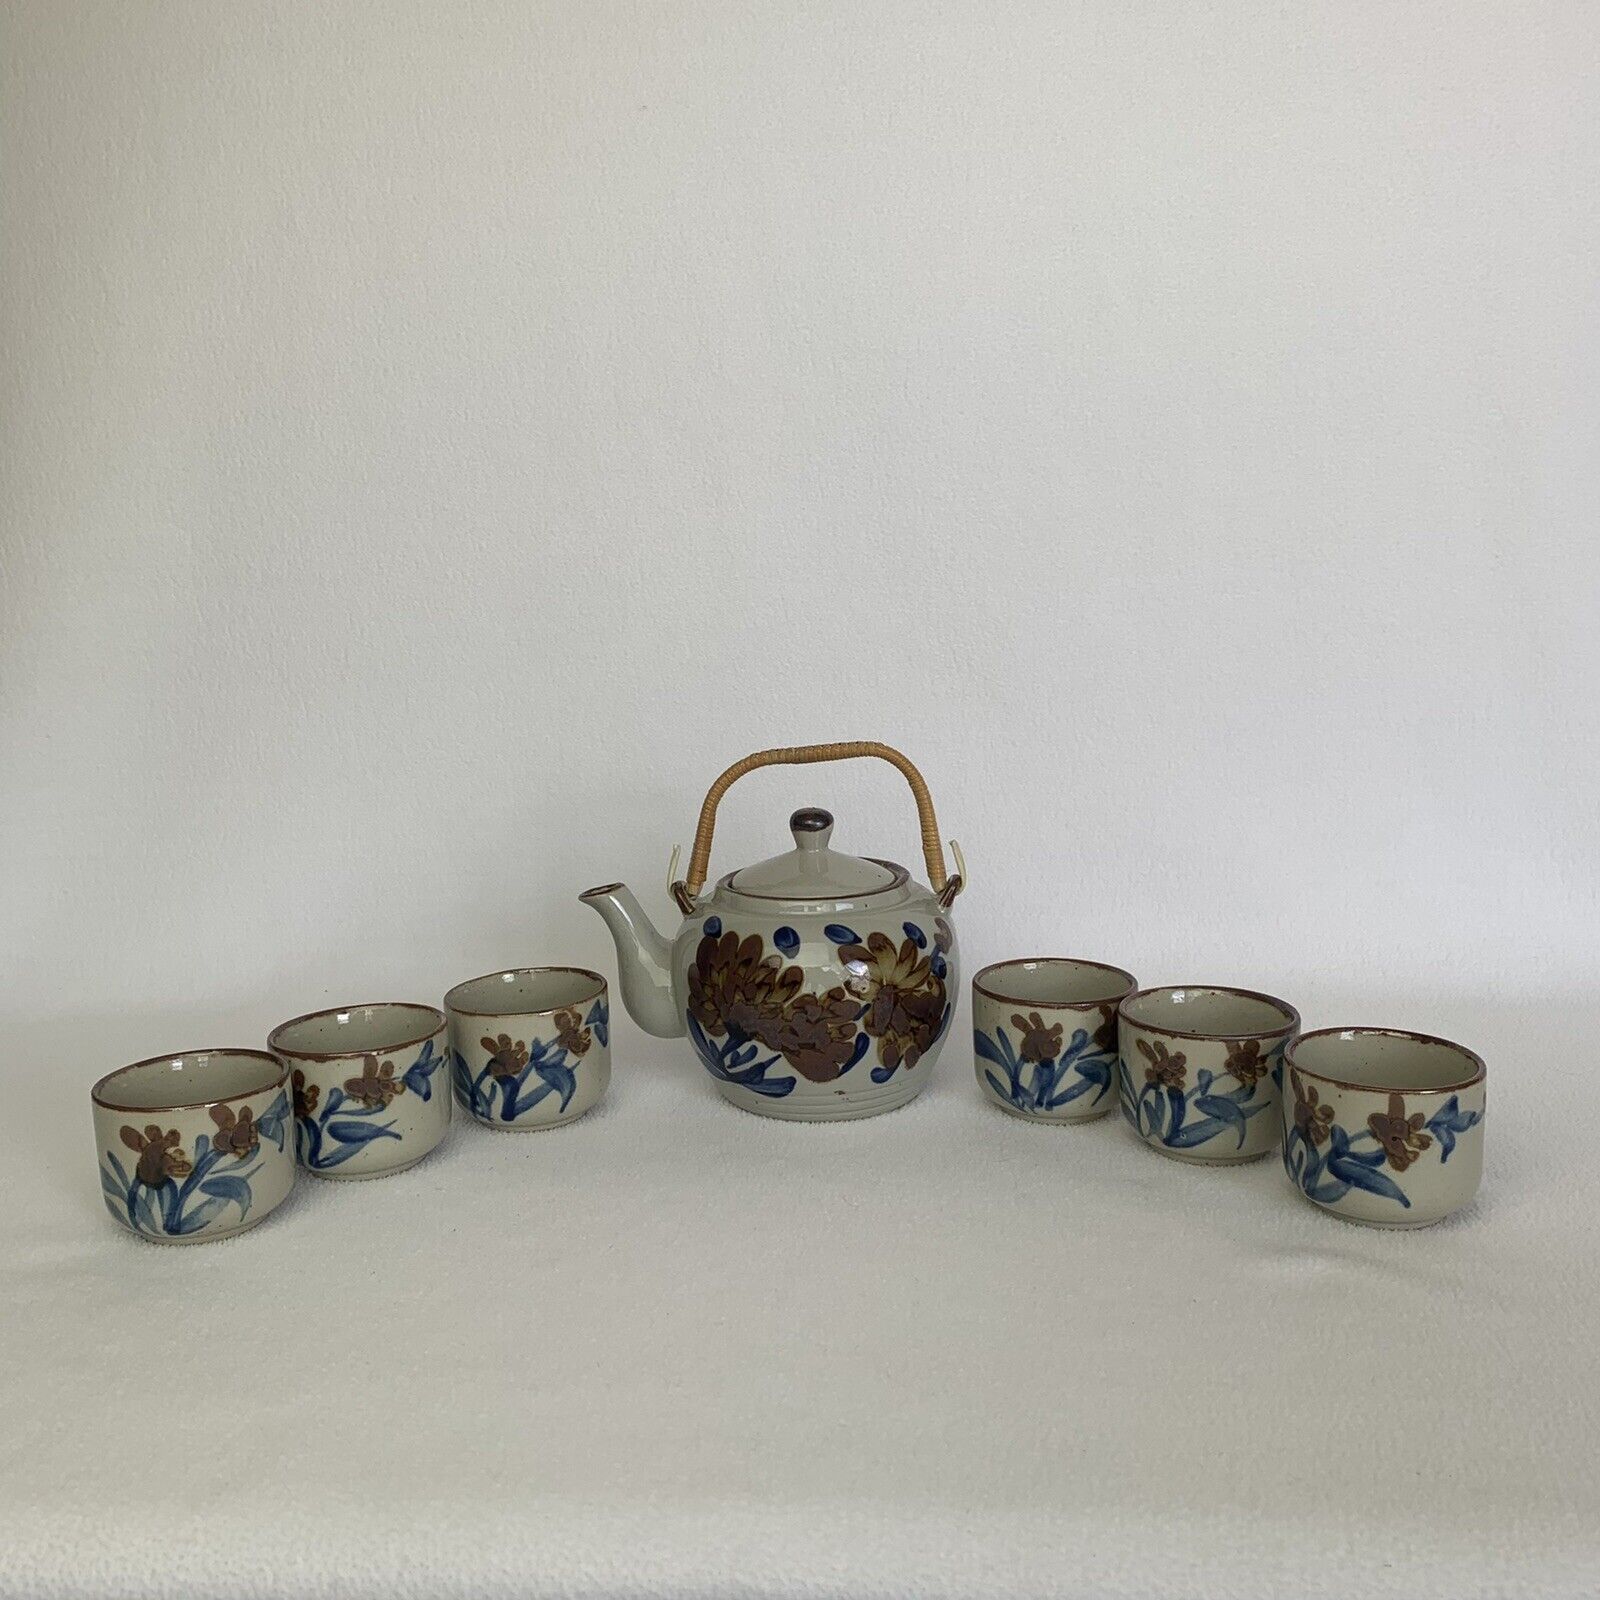 Vintage Japanese Style Teapot Bamboo Handle and 6 Sake Cup Set Floral Stoneware